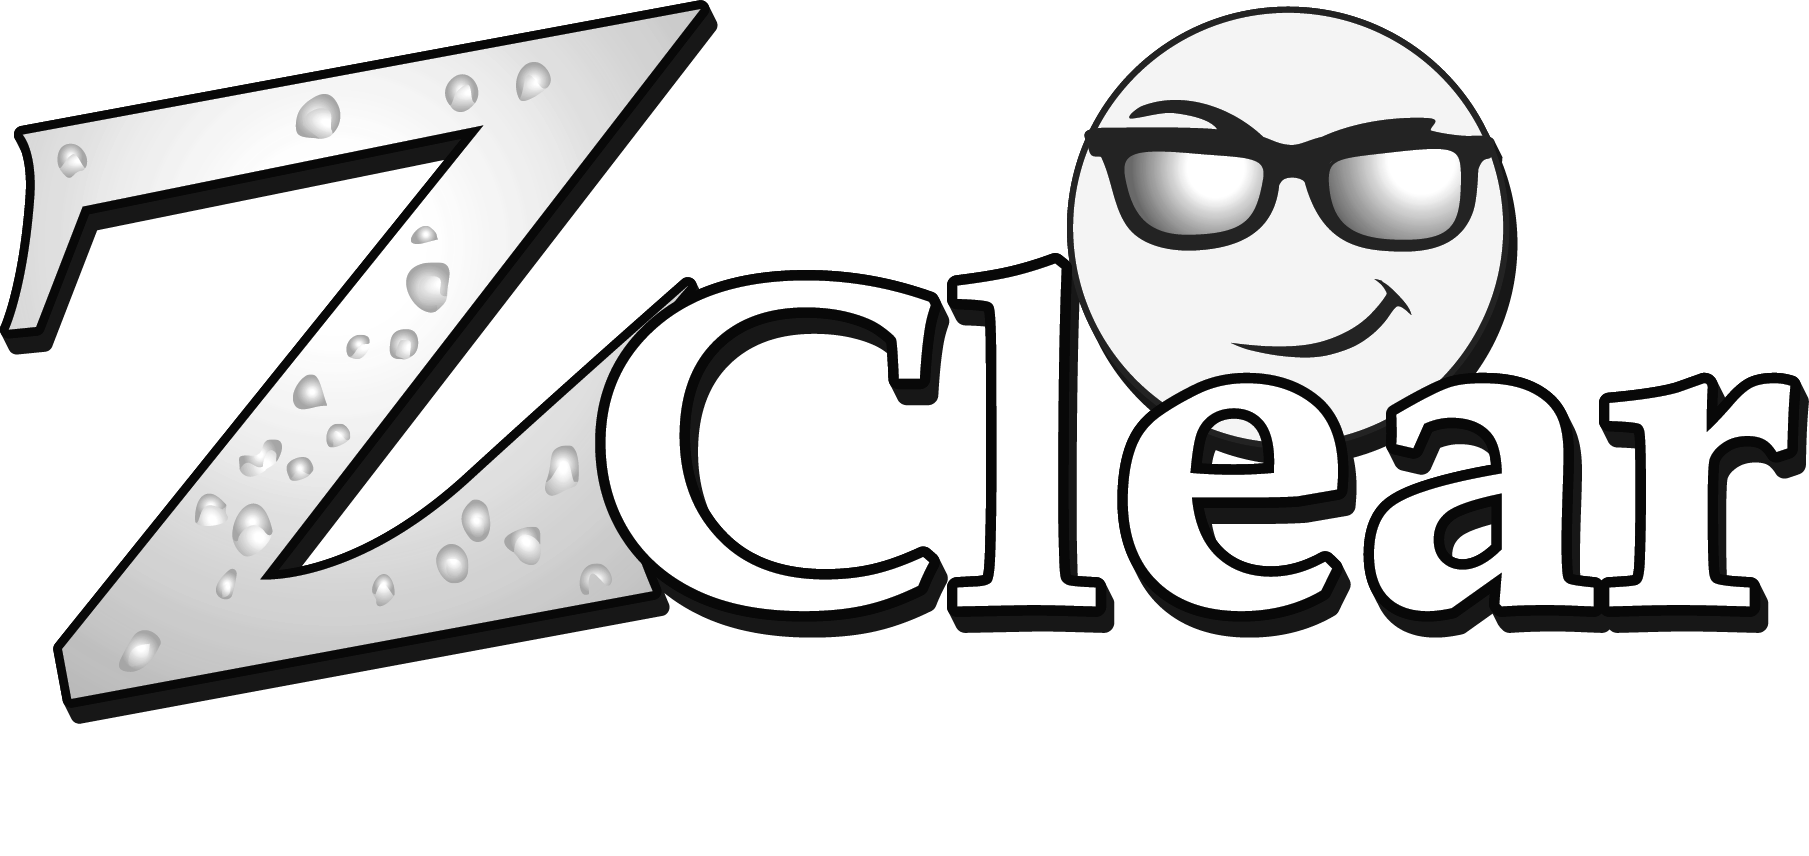 Zclear